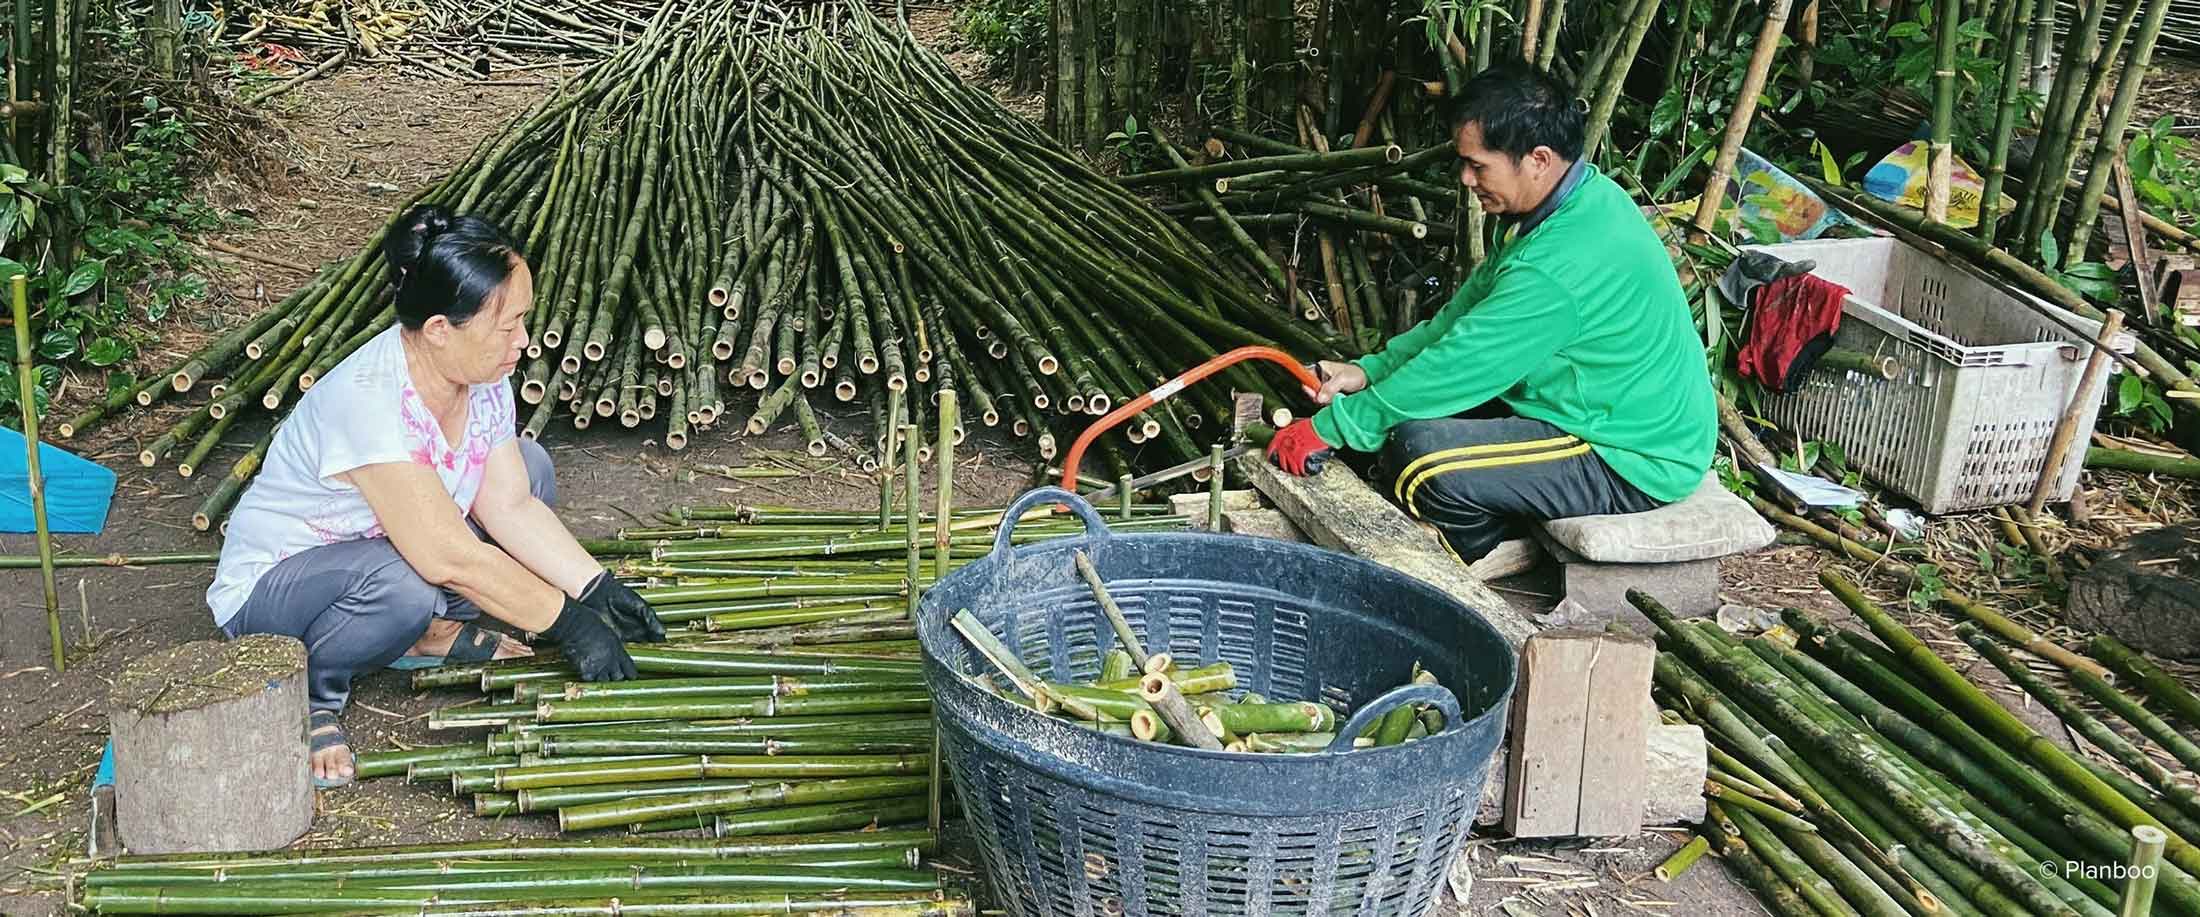 WongPhai Bamboo Biochar carbon offset credit project in Thailand.